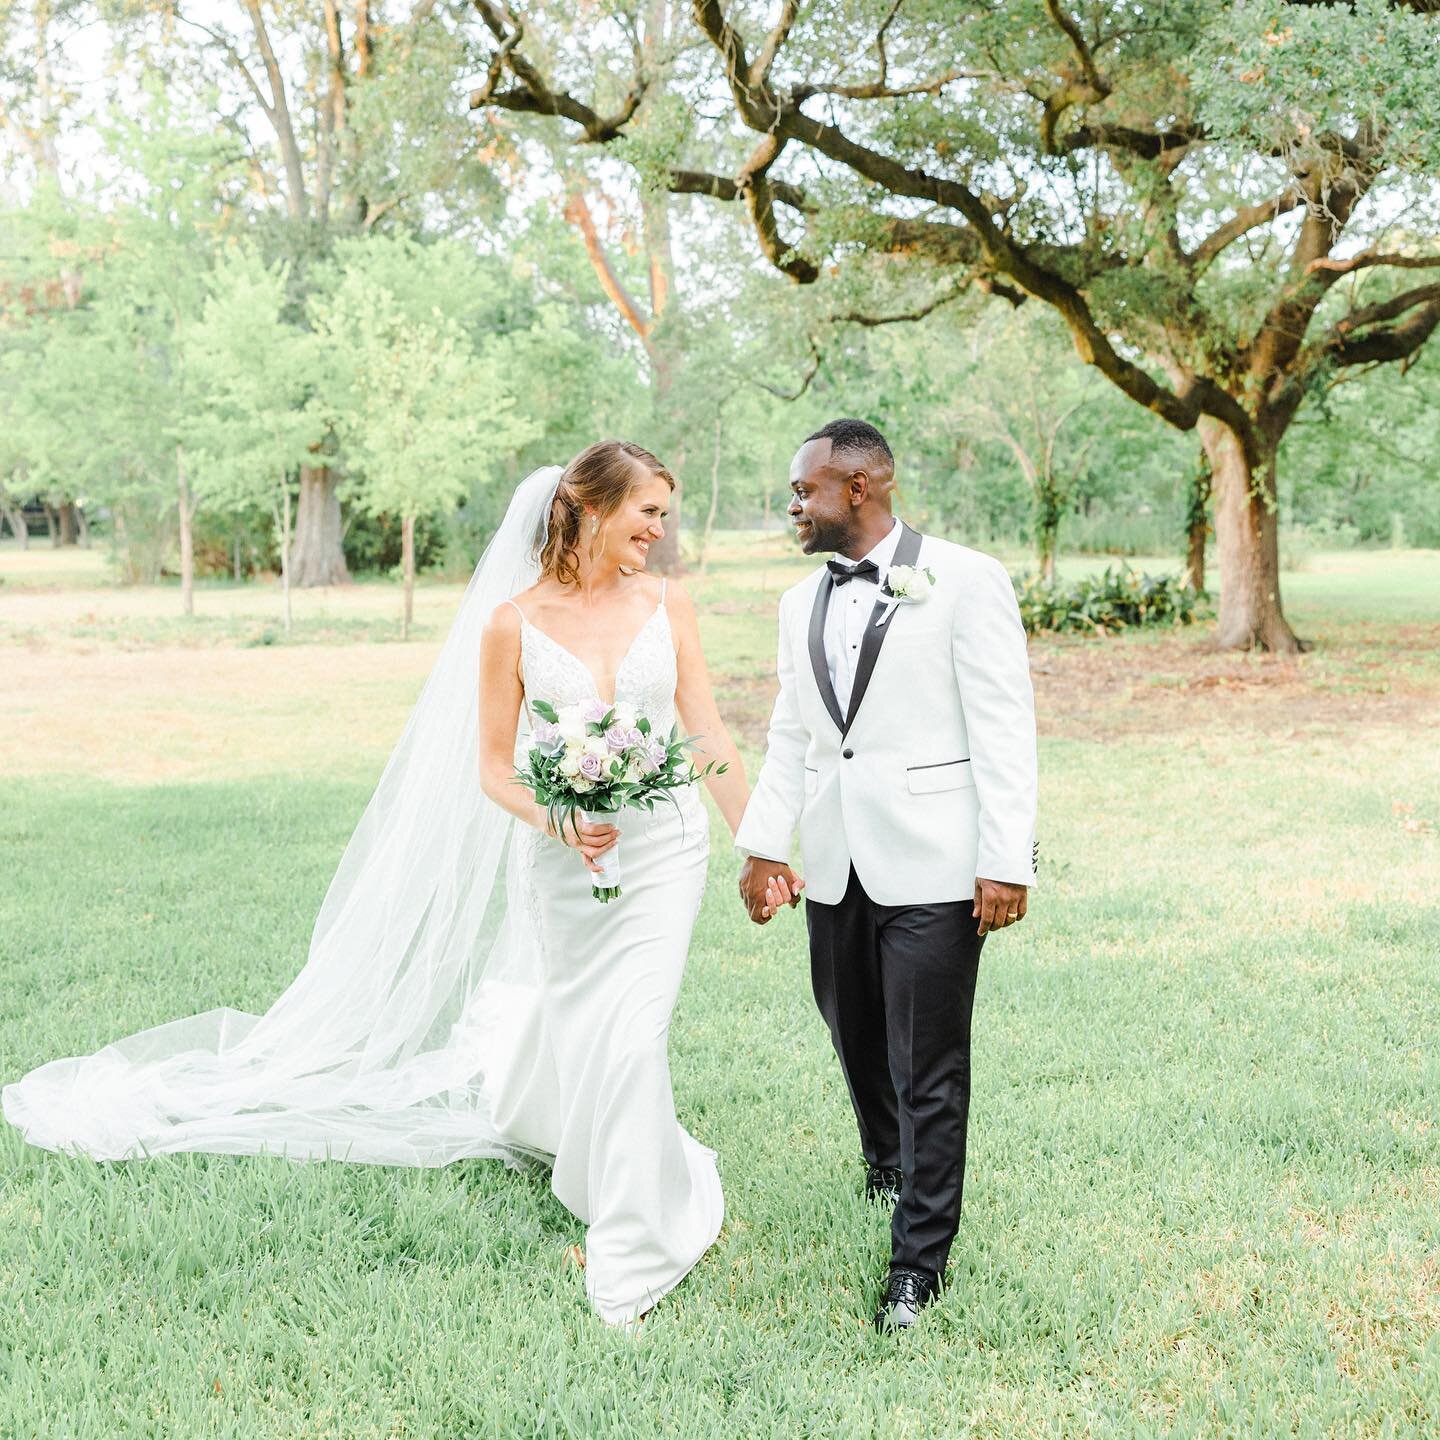 Ashley and Ibukun's Wedding day previews were sent out today and I am beyond excited with how they turned out.

 It was such a beautiful experience photographing this sweet couple. 

Congratulations to you two!
@ashleydeelevy  @ibkosikoya 

Vendors 
